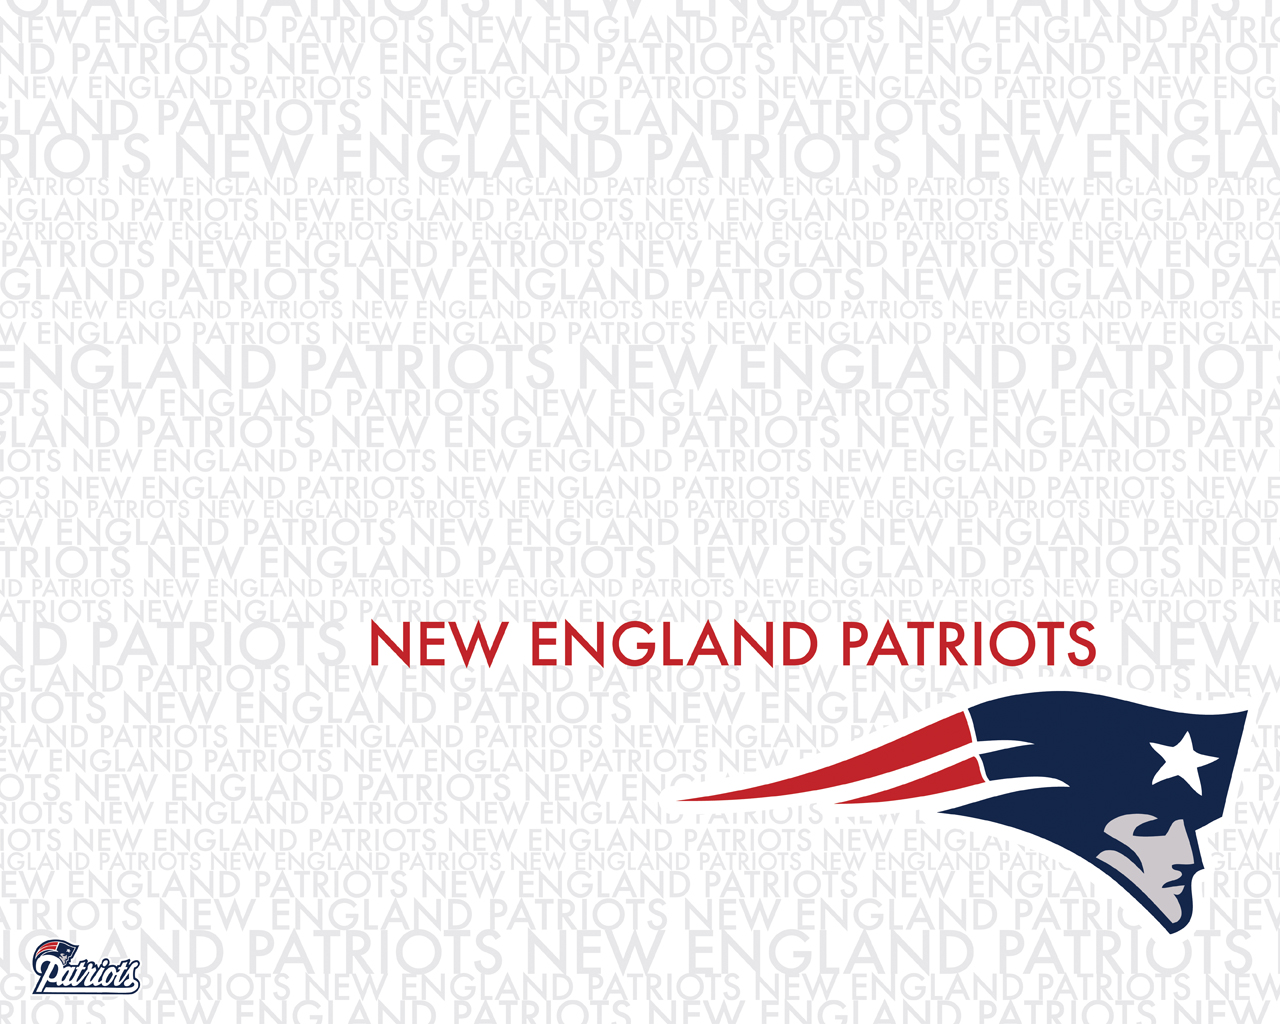 More New England Patriots wallpapers New England Patriots wallpapers